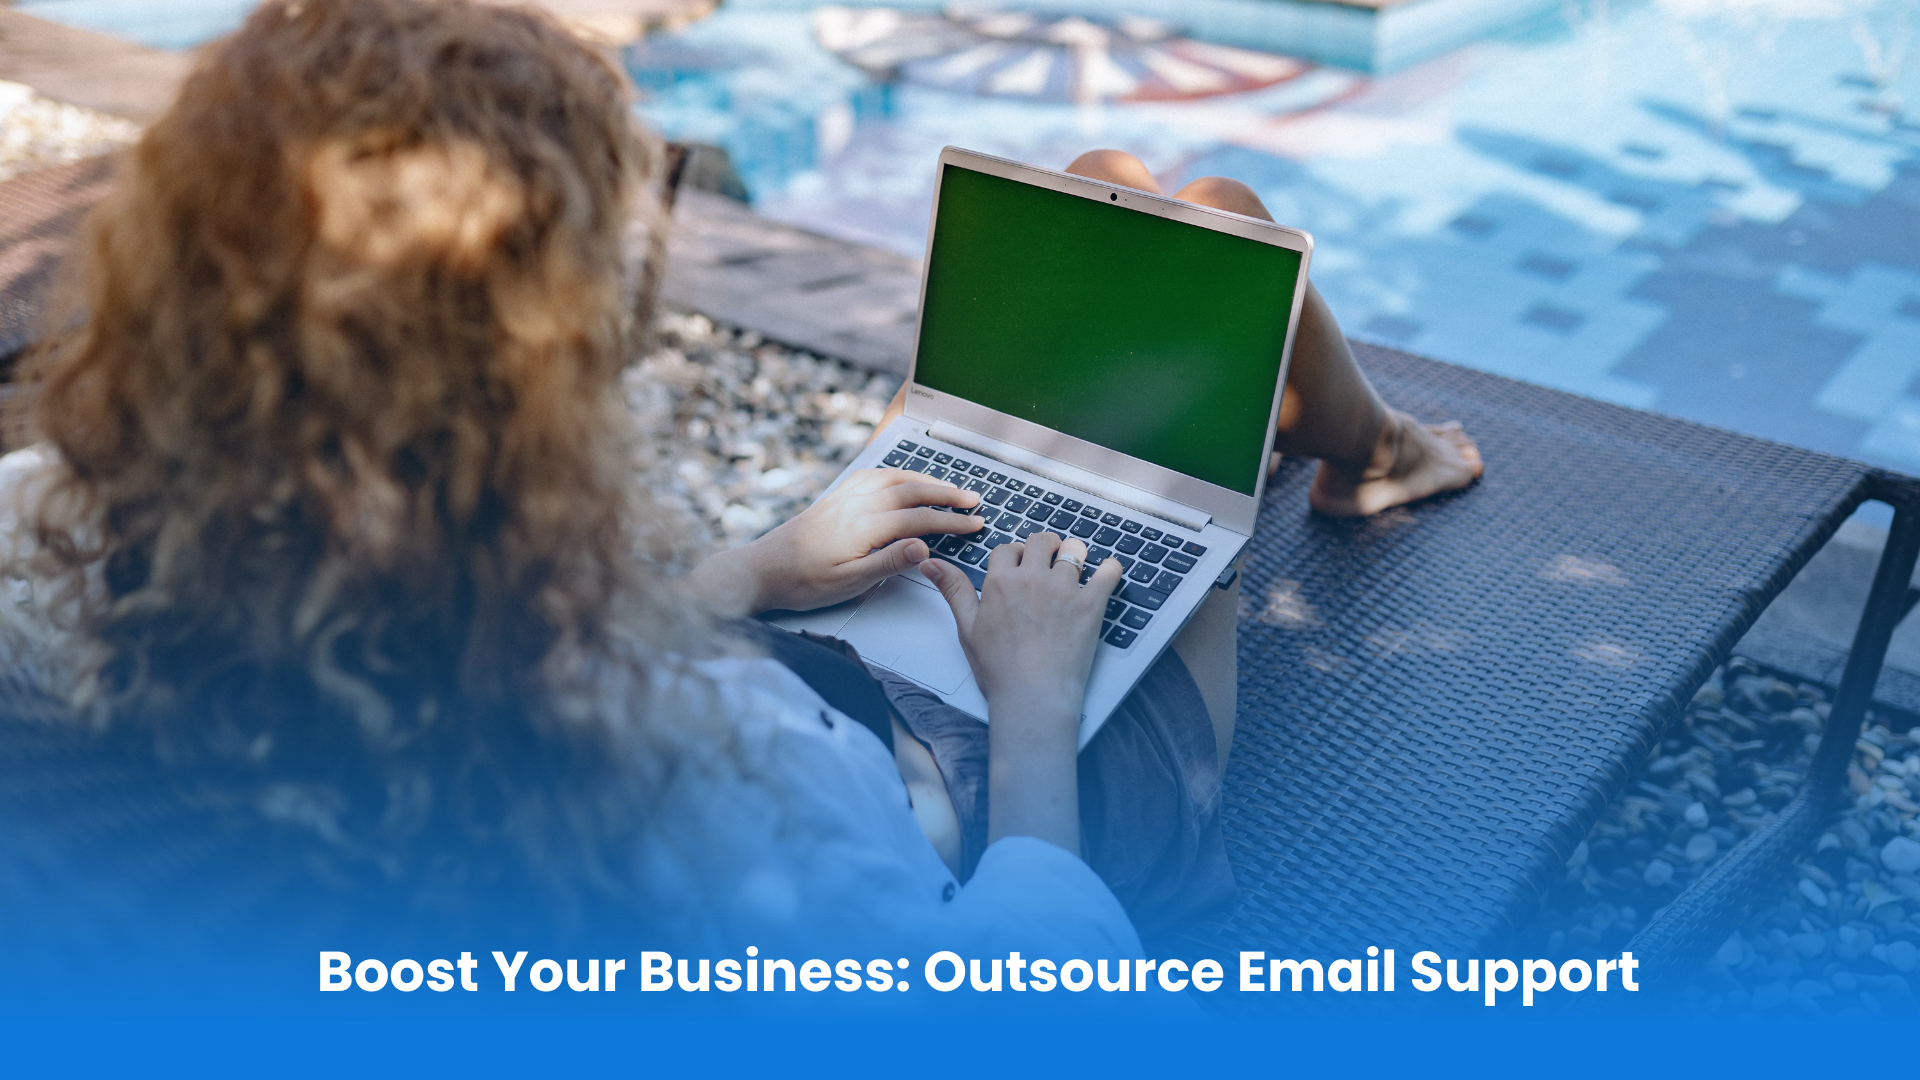 Boost your business by outsourcing email support.